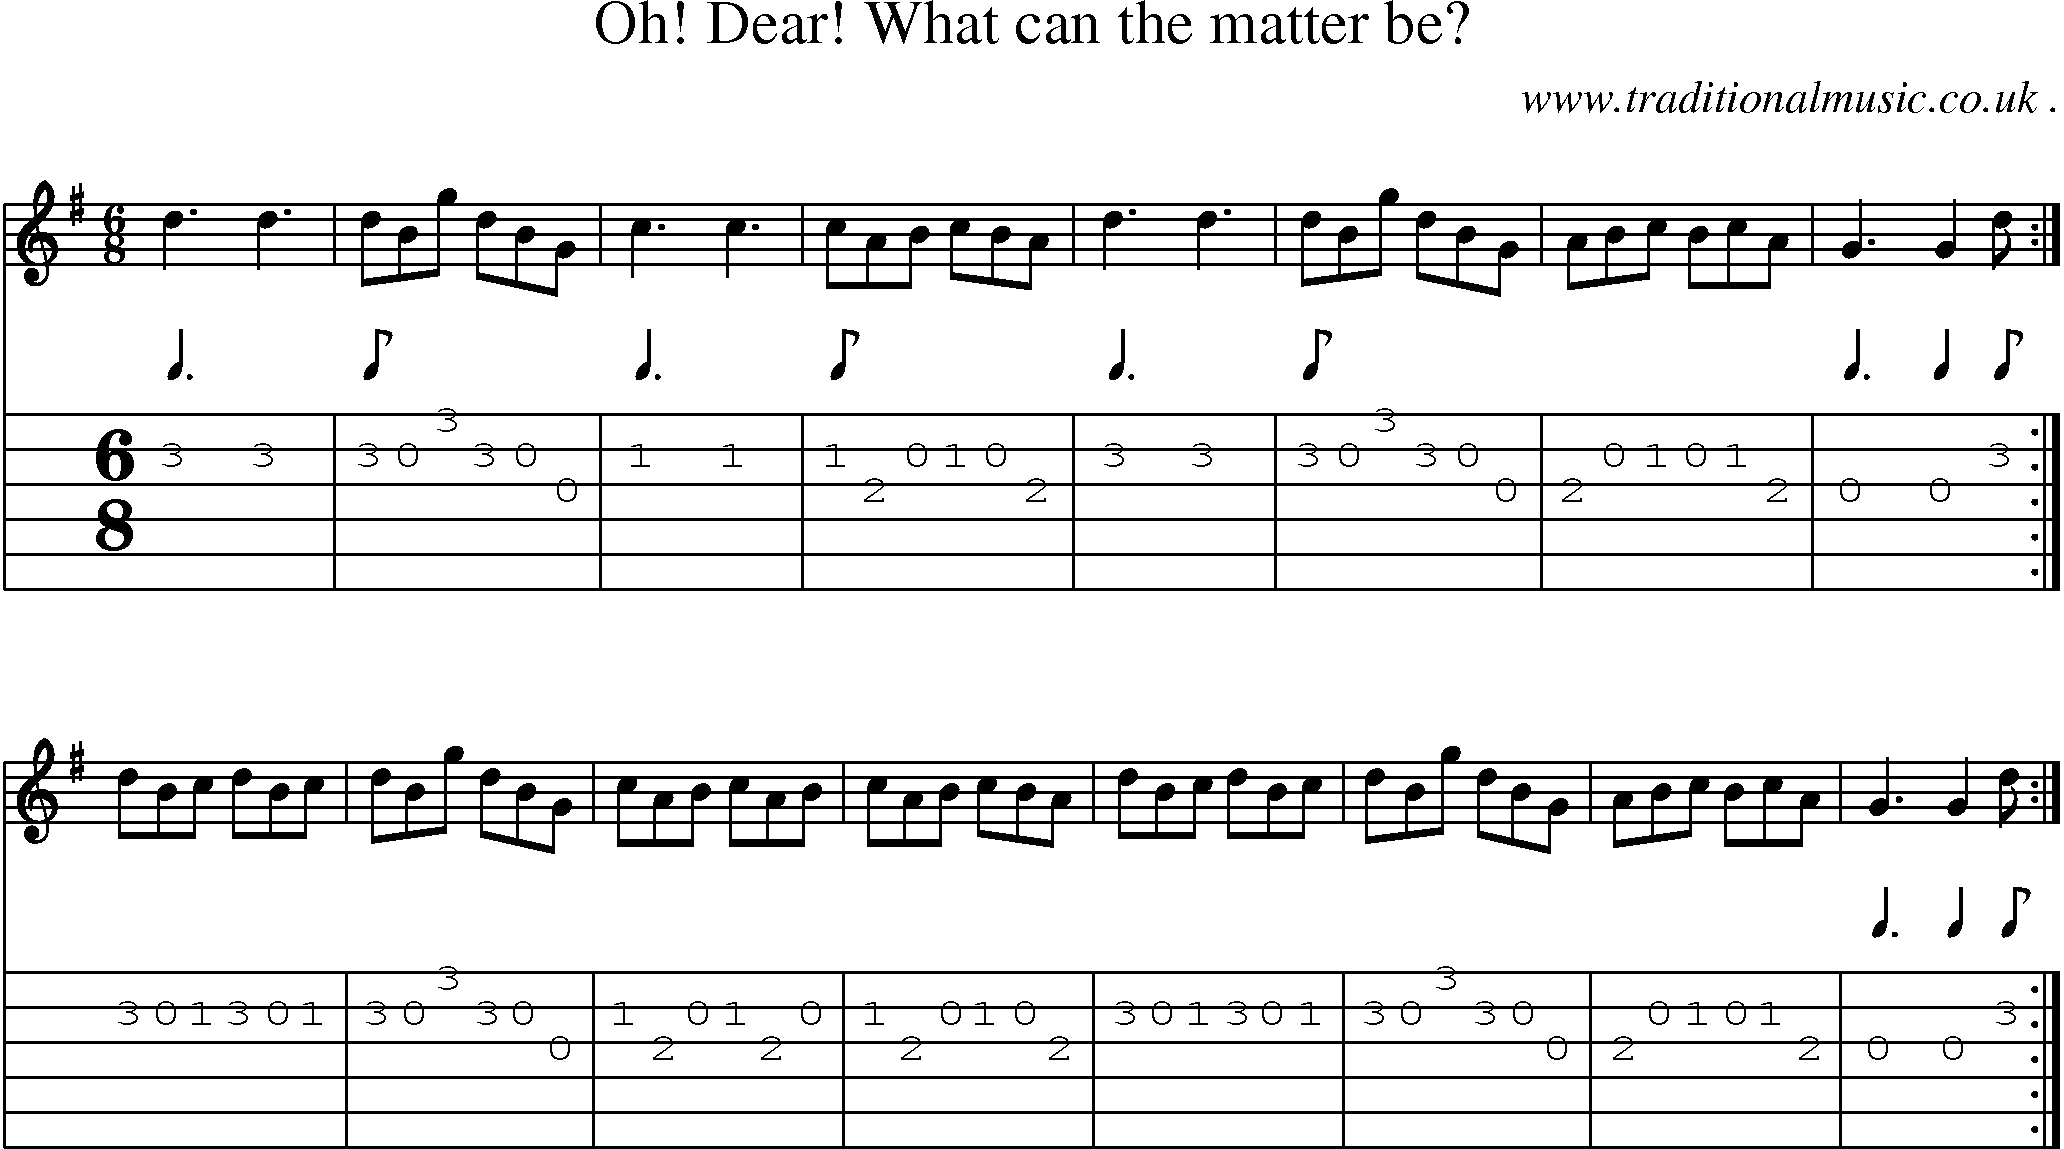 Music Score and Guitar Tabs for Oh! Dear! What can the matter be